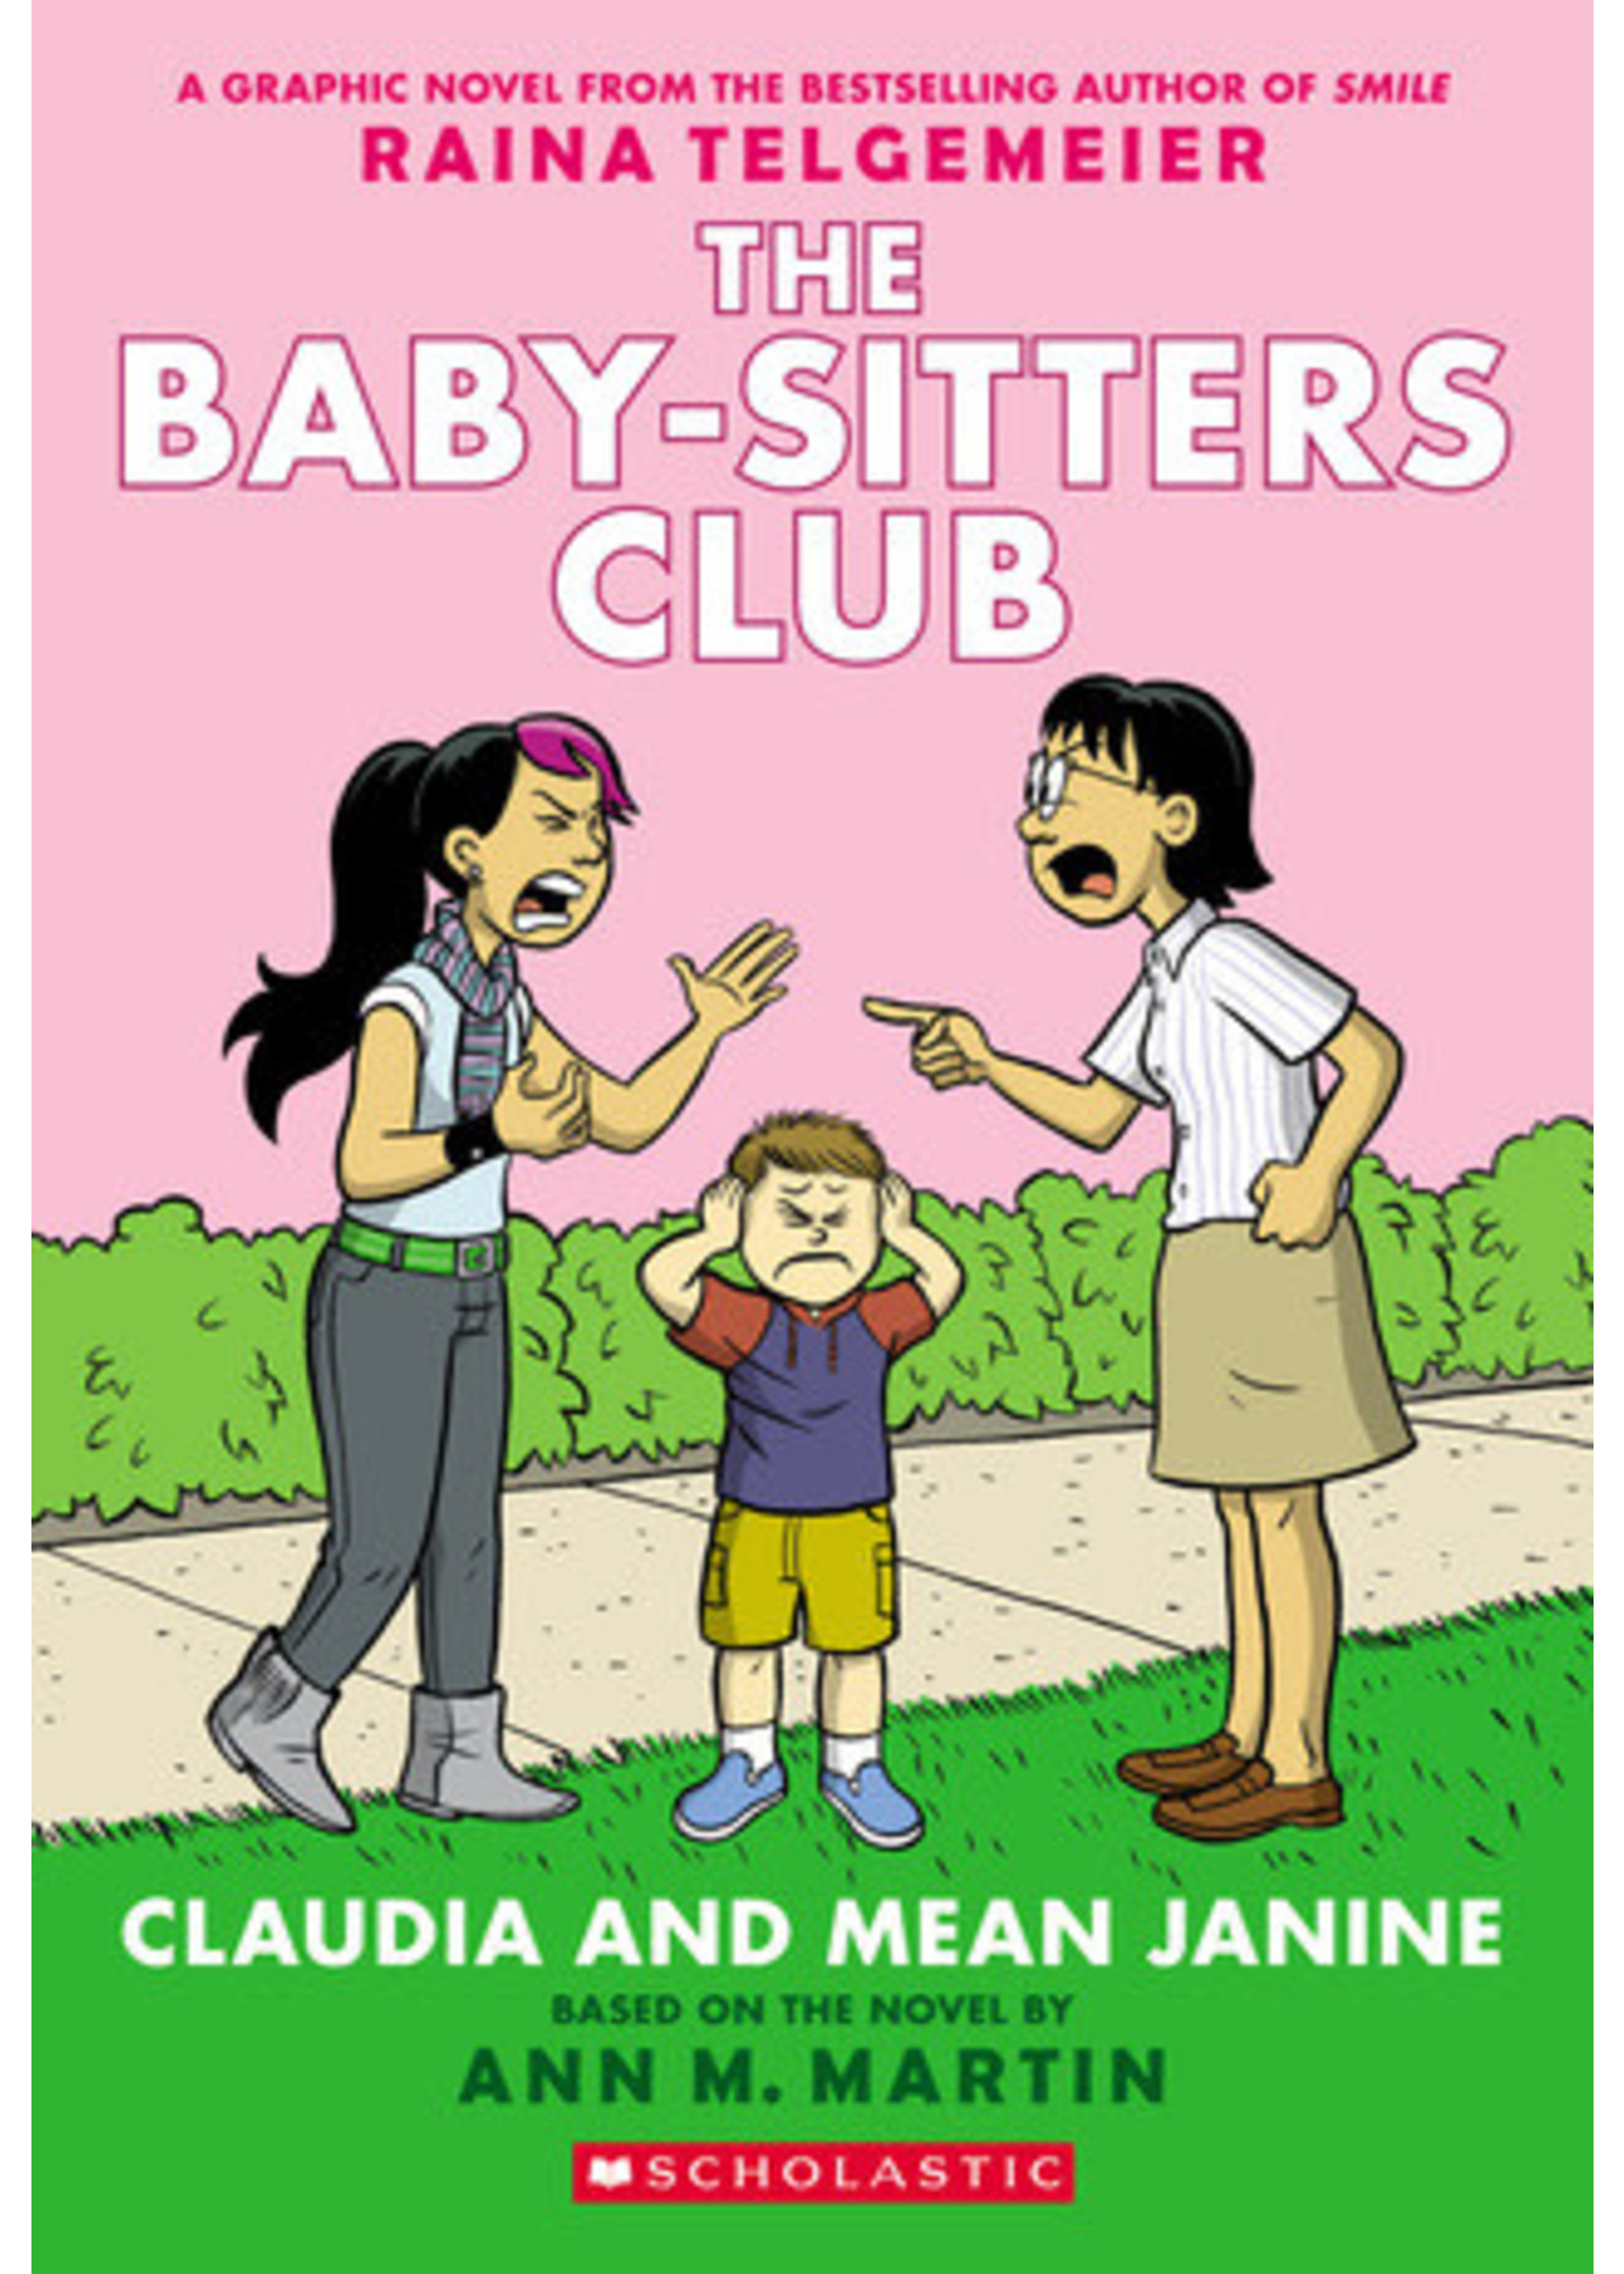 Claudia and Mean Janine (Baby-Sitters Club Graphic Novels #4) by Raina Telgemeier